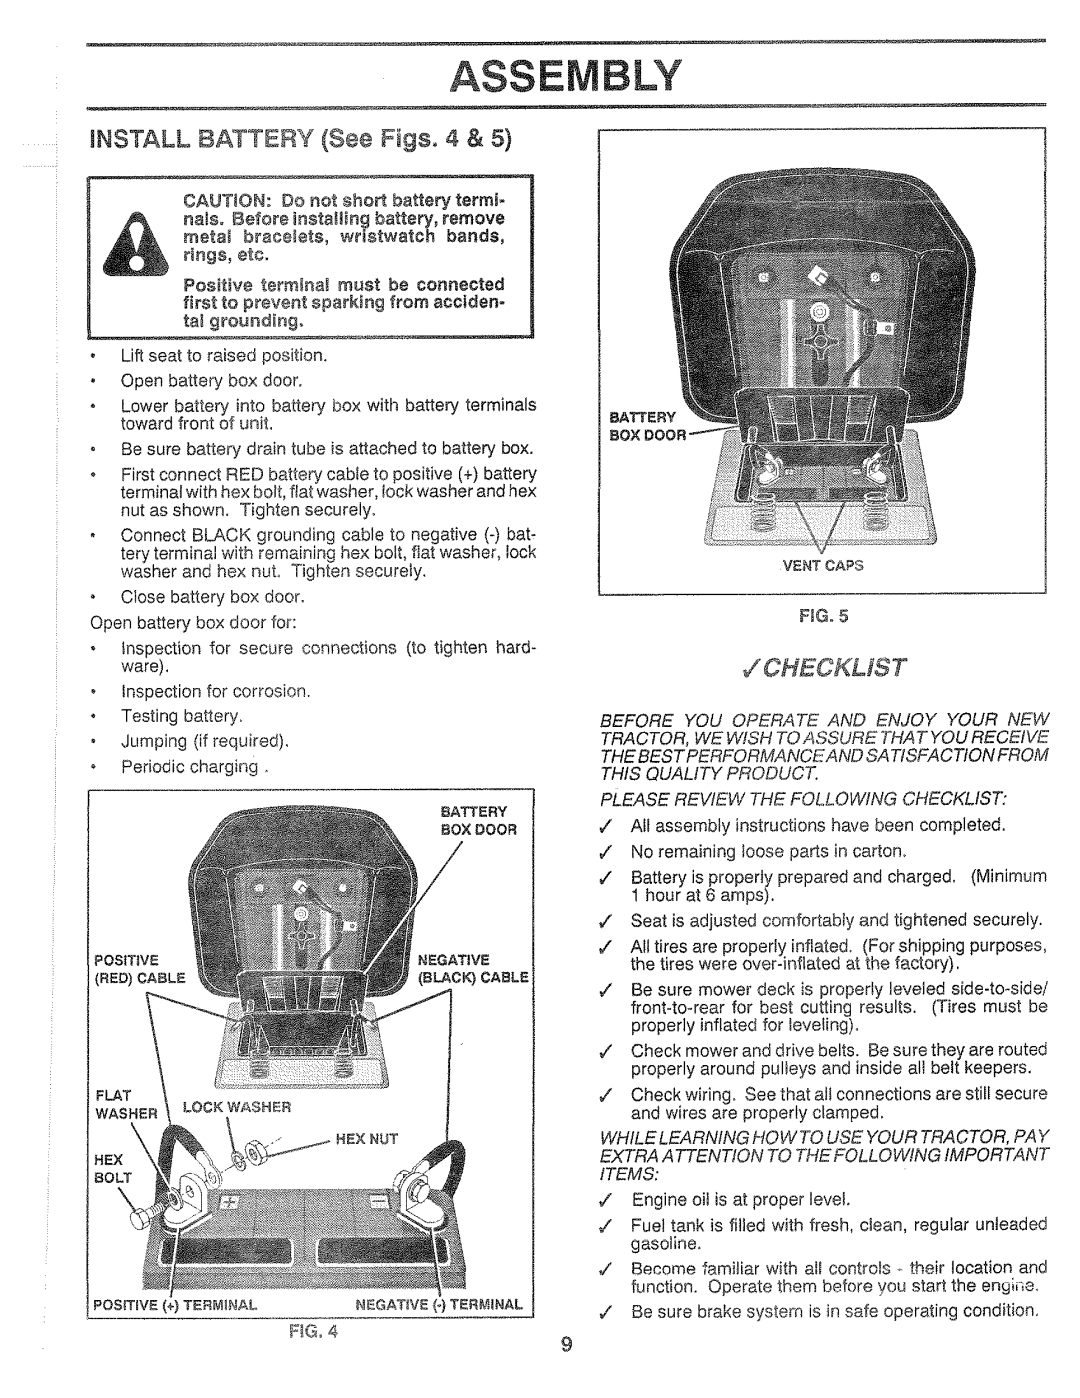 Sears 917.25559 manual iNSTALL BATTERY See Figs. 4, Checkmst, Ass Ly 